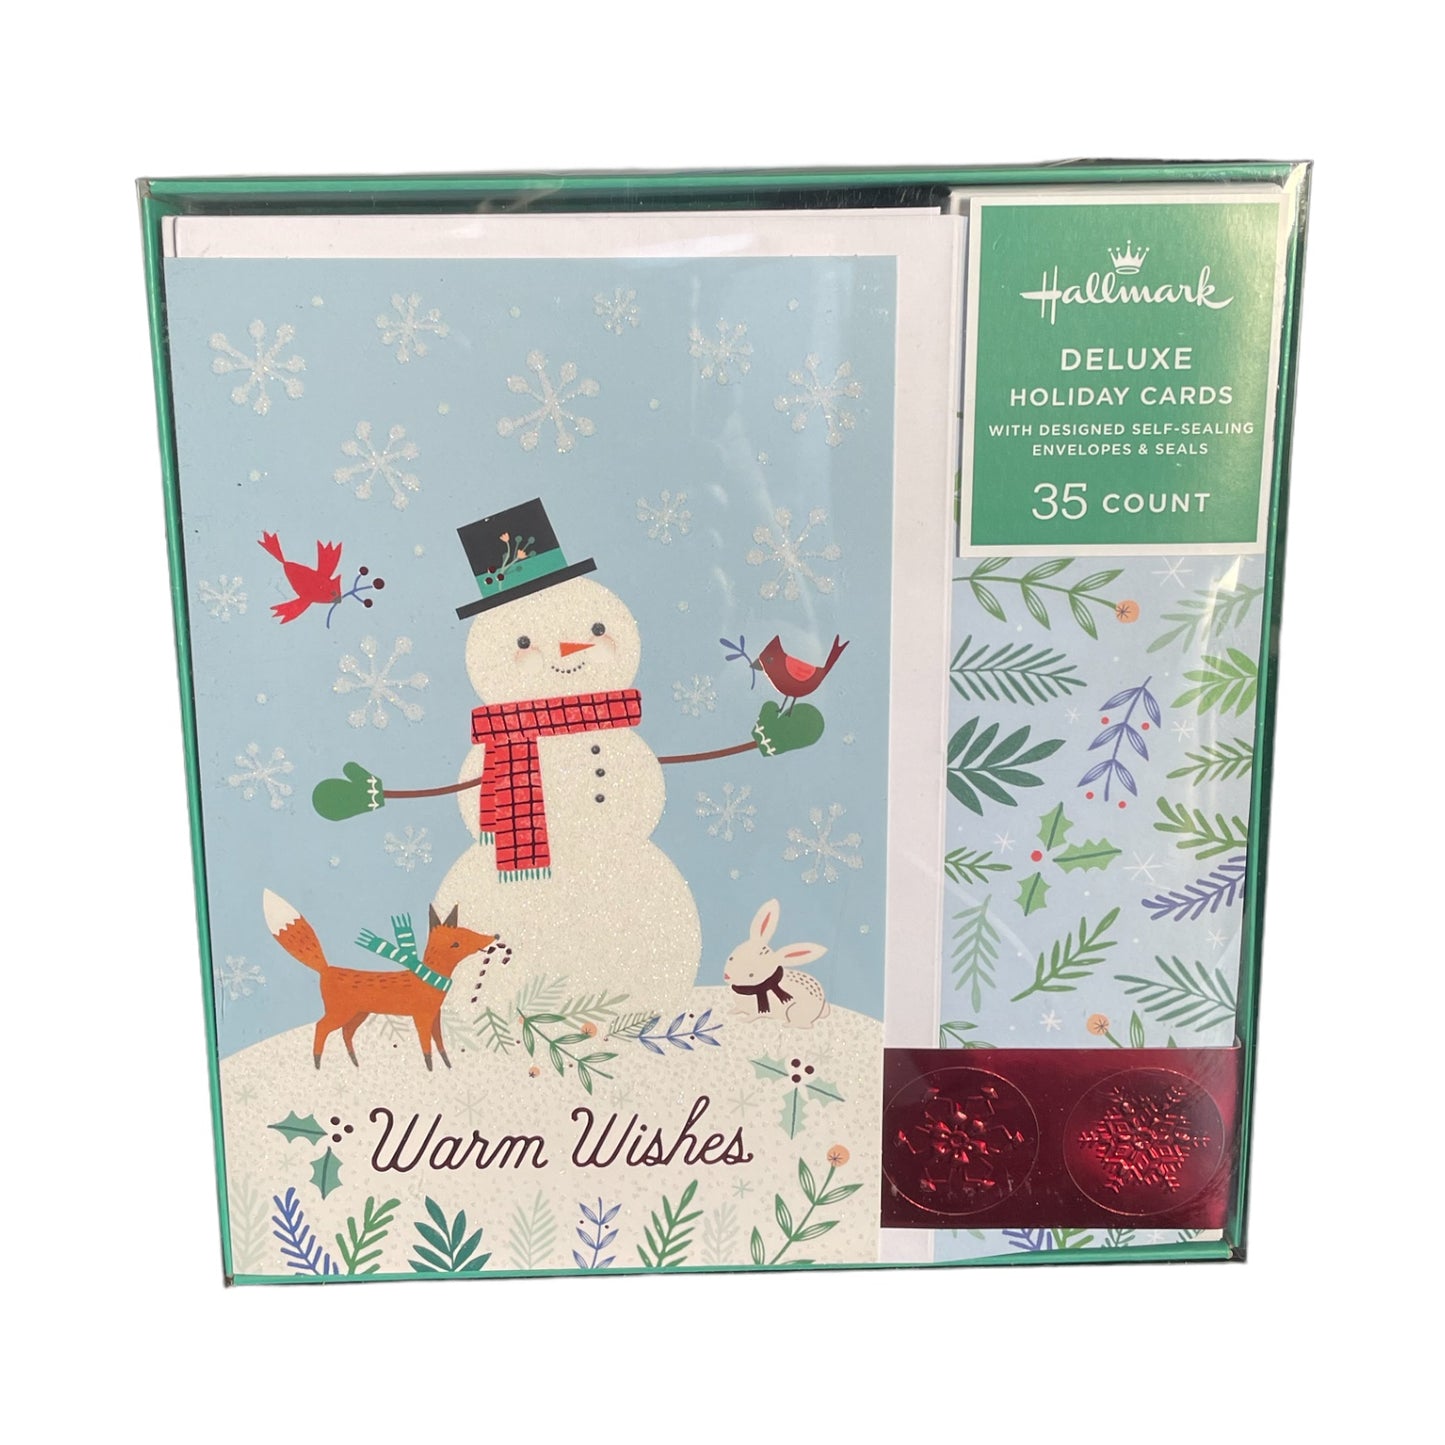 Hallmark Deluxe Holiday Cards, 35 Count, Snowman, Warm Wishes